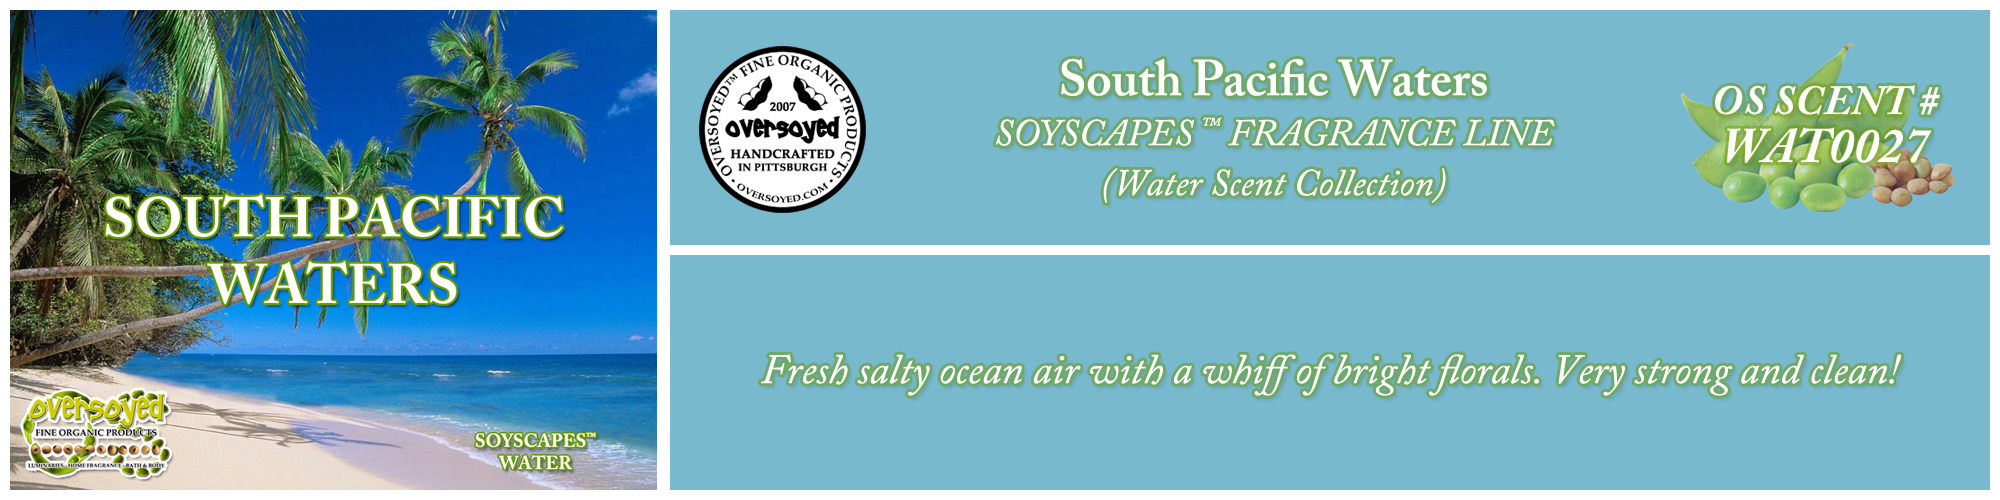 South Pacific Waters Handcrafted Products Collection